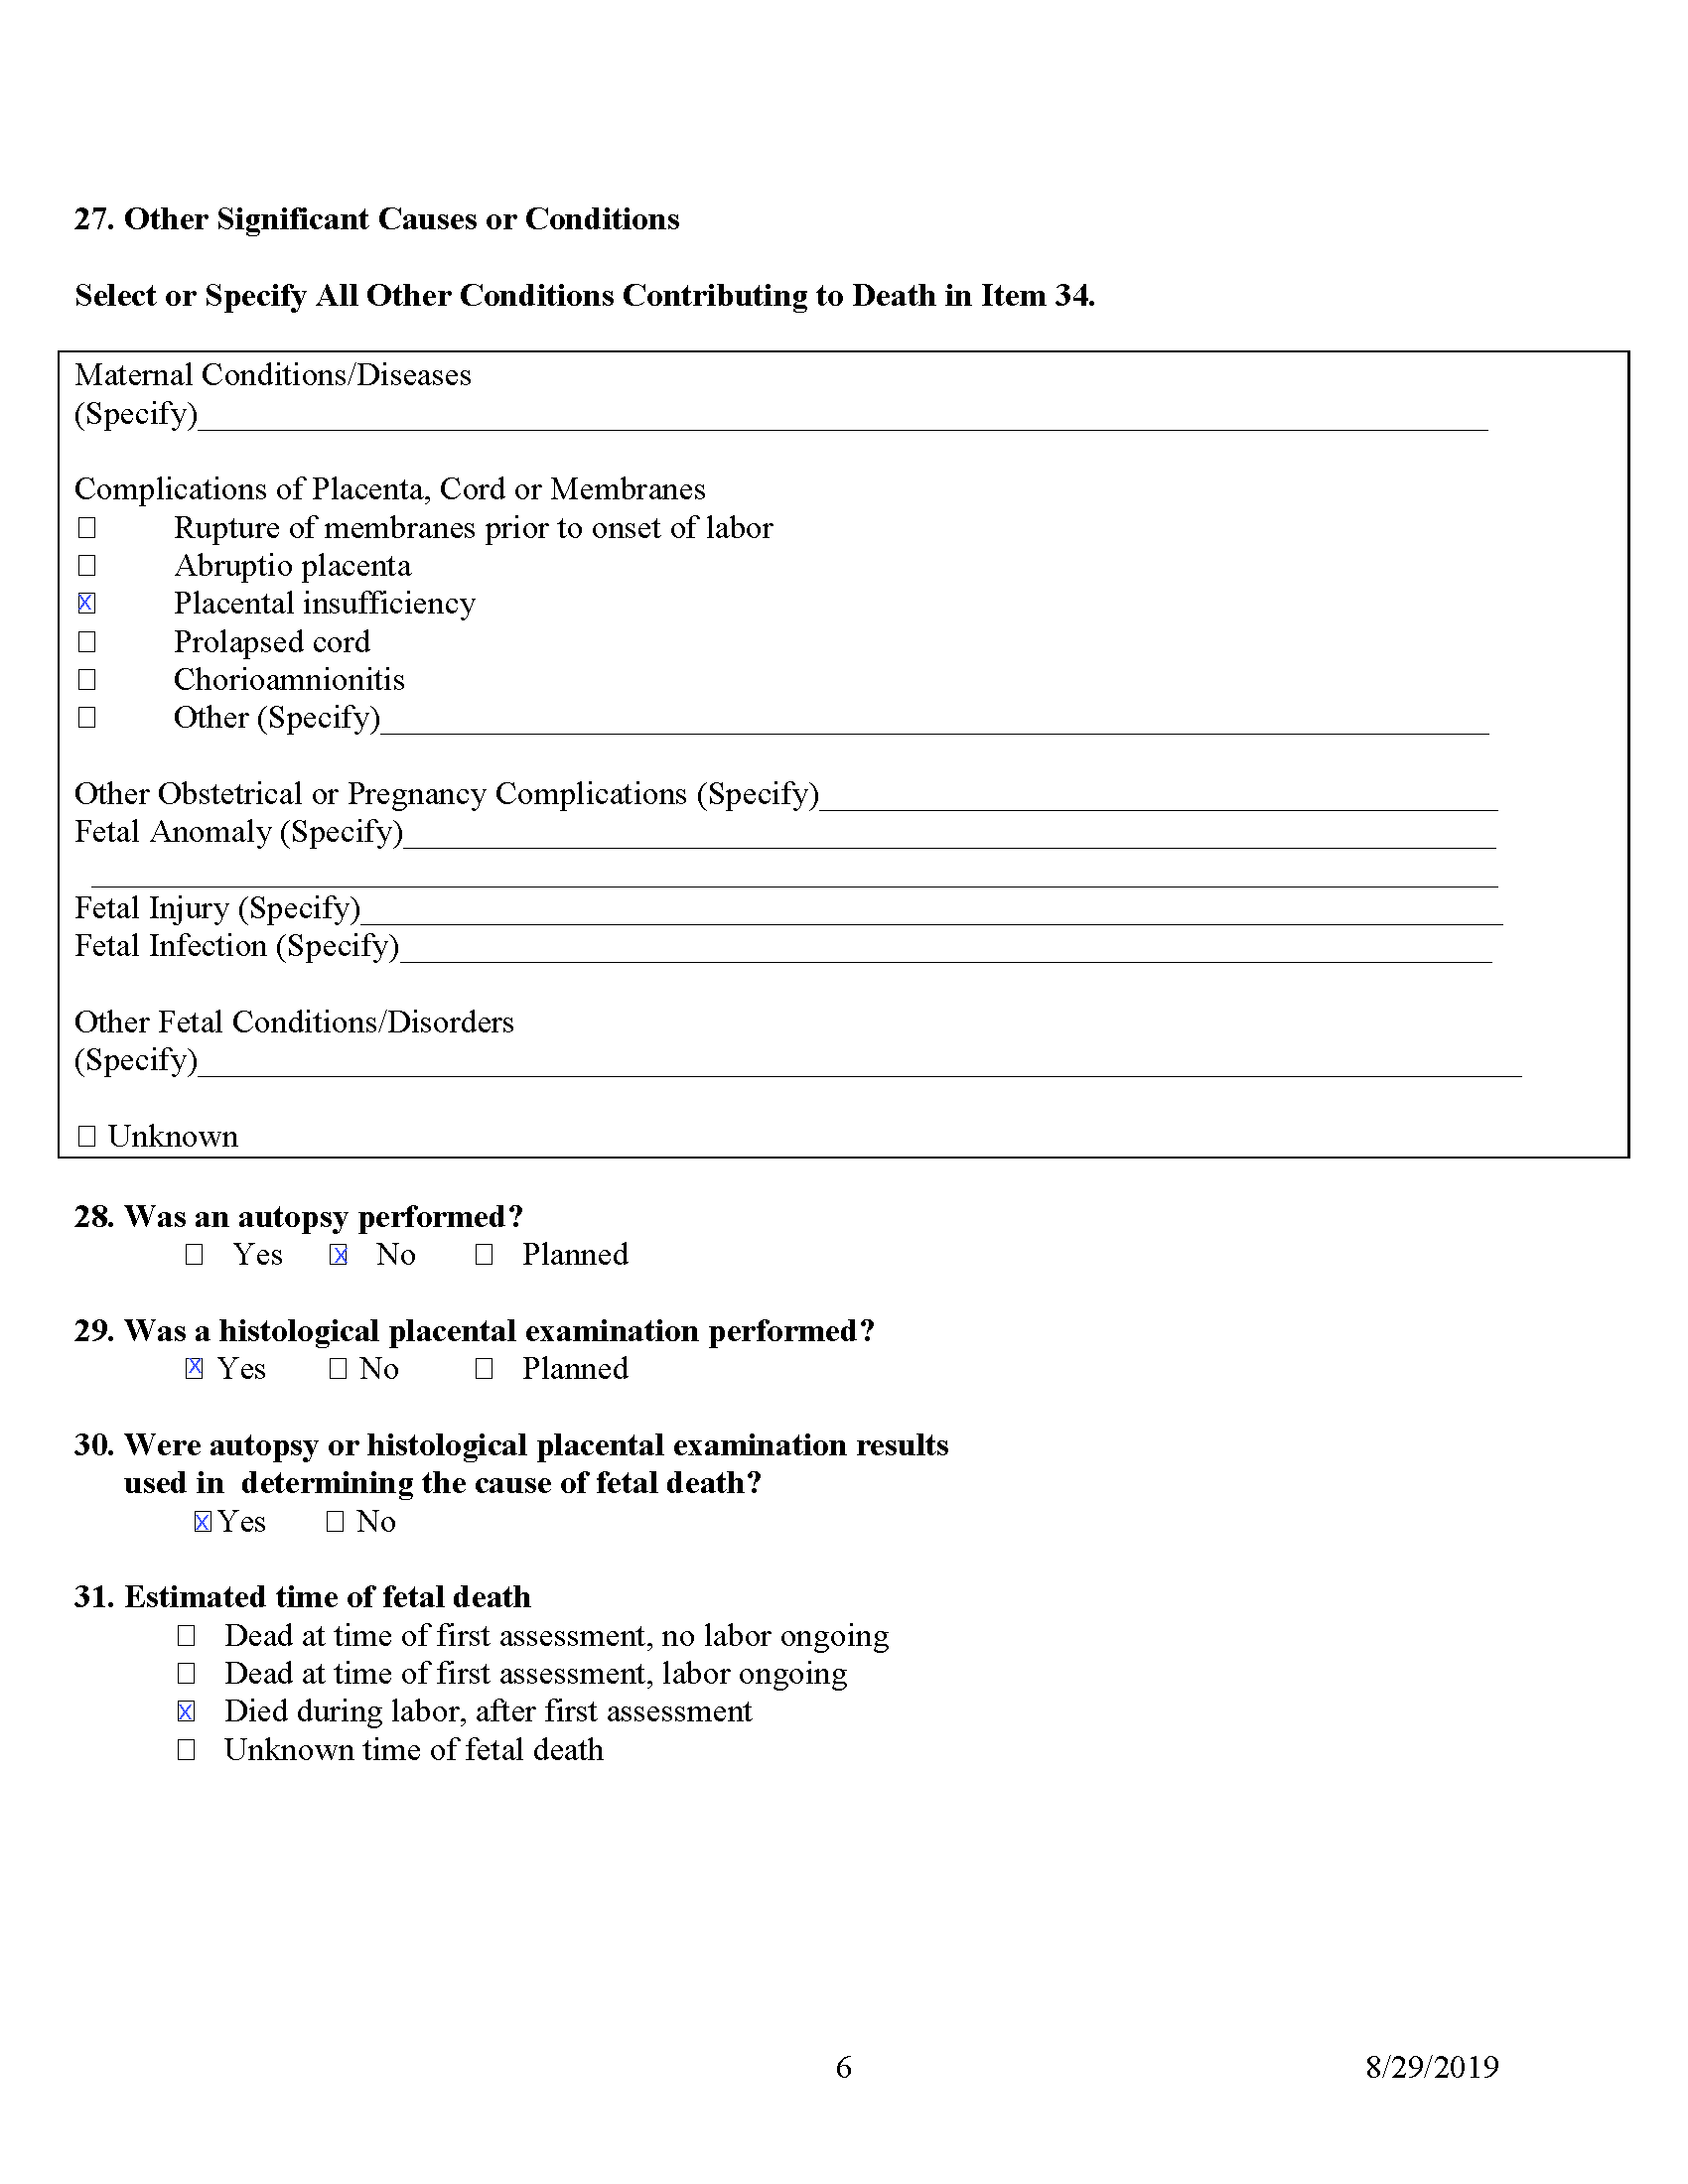 Example Facility Worksheet for Fetal Death Report - p6